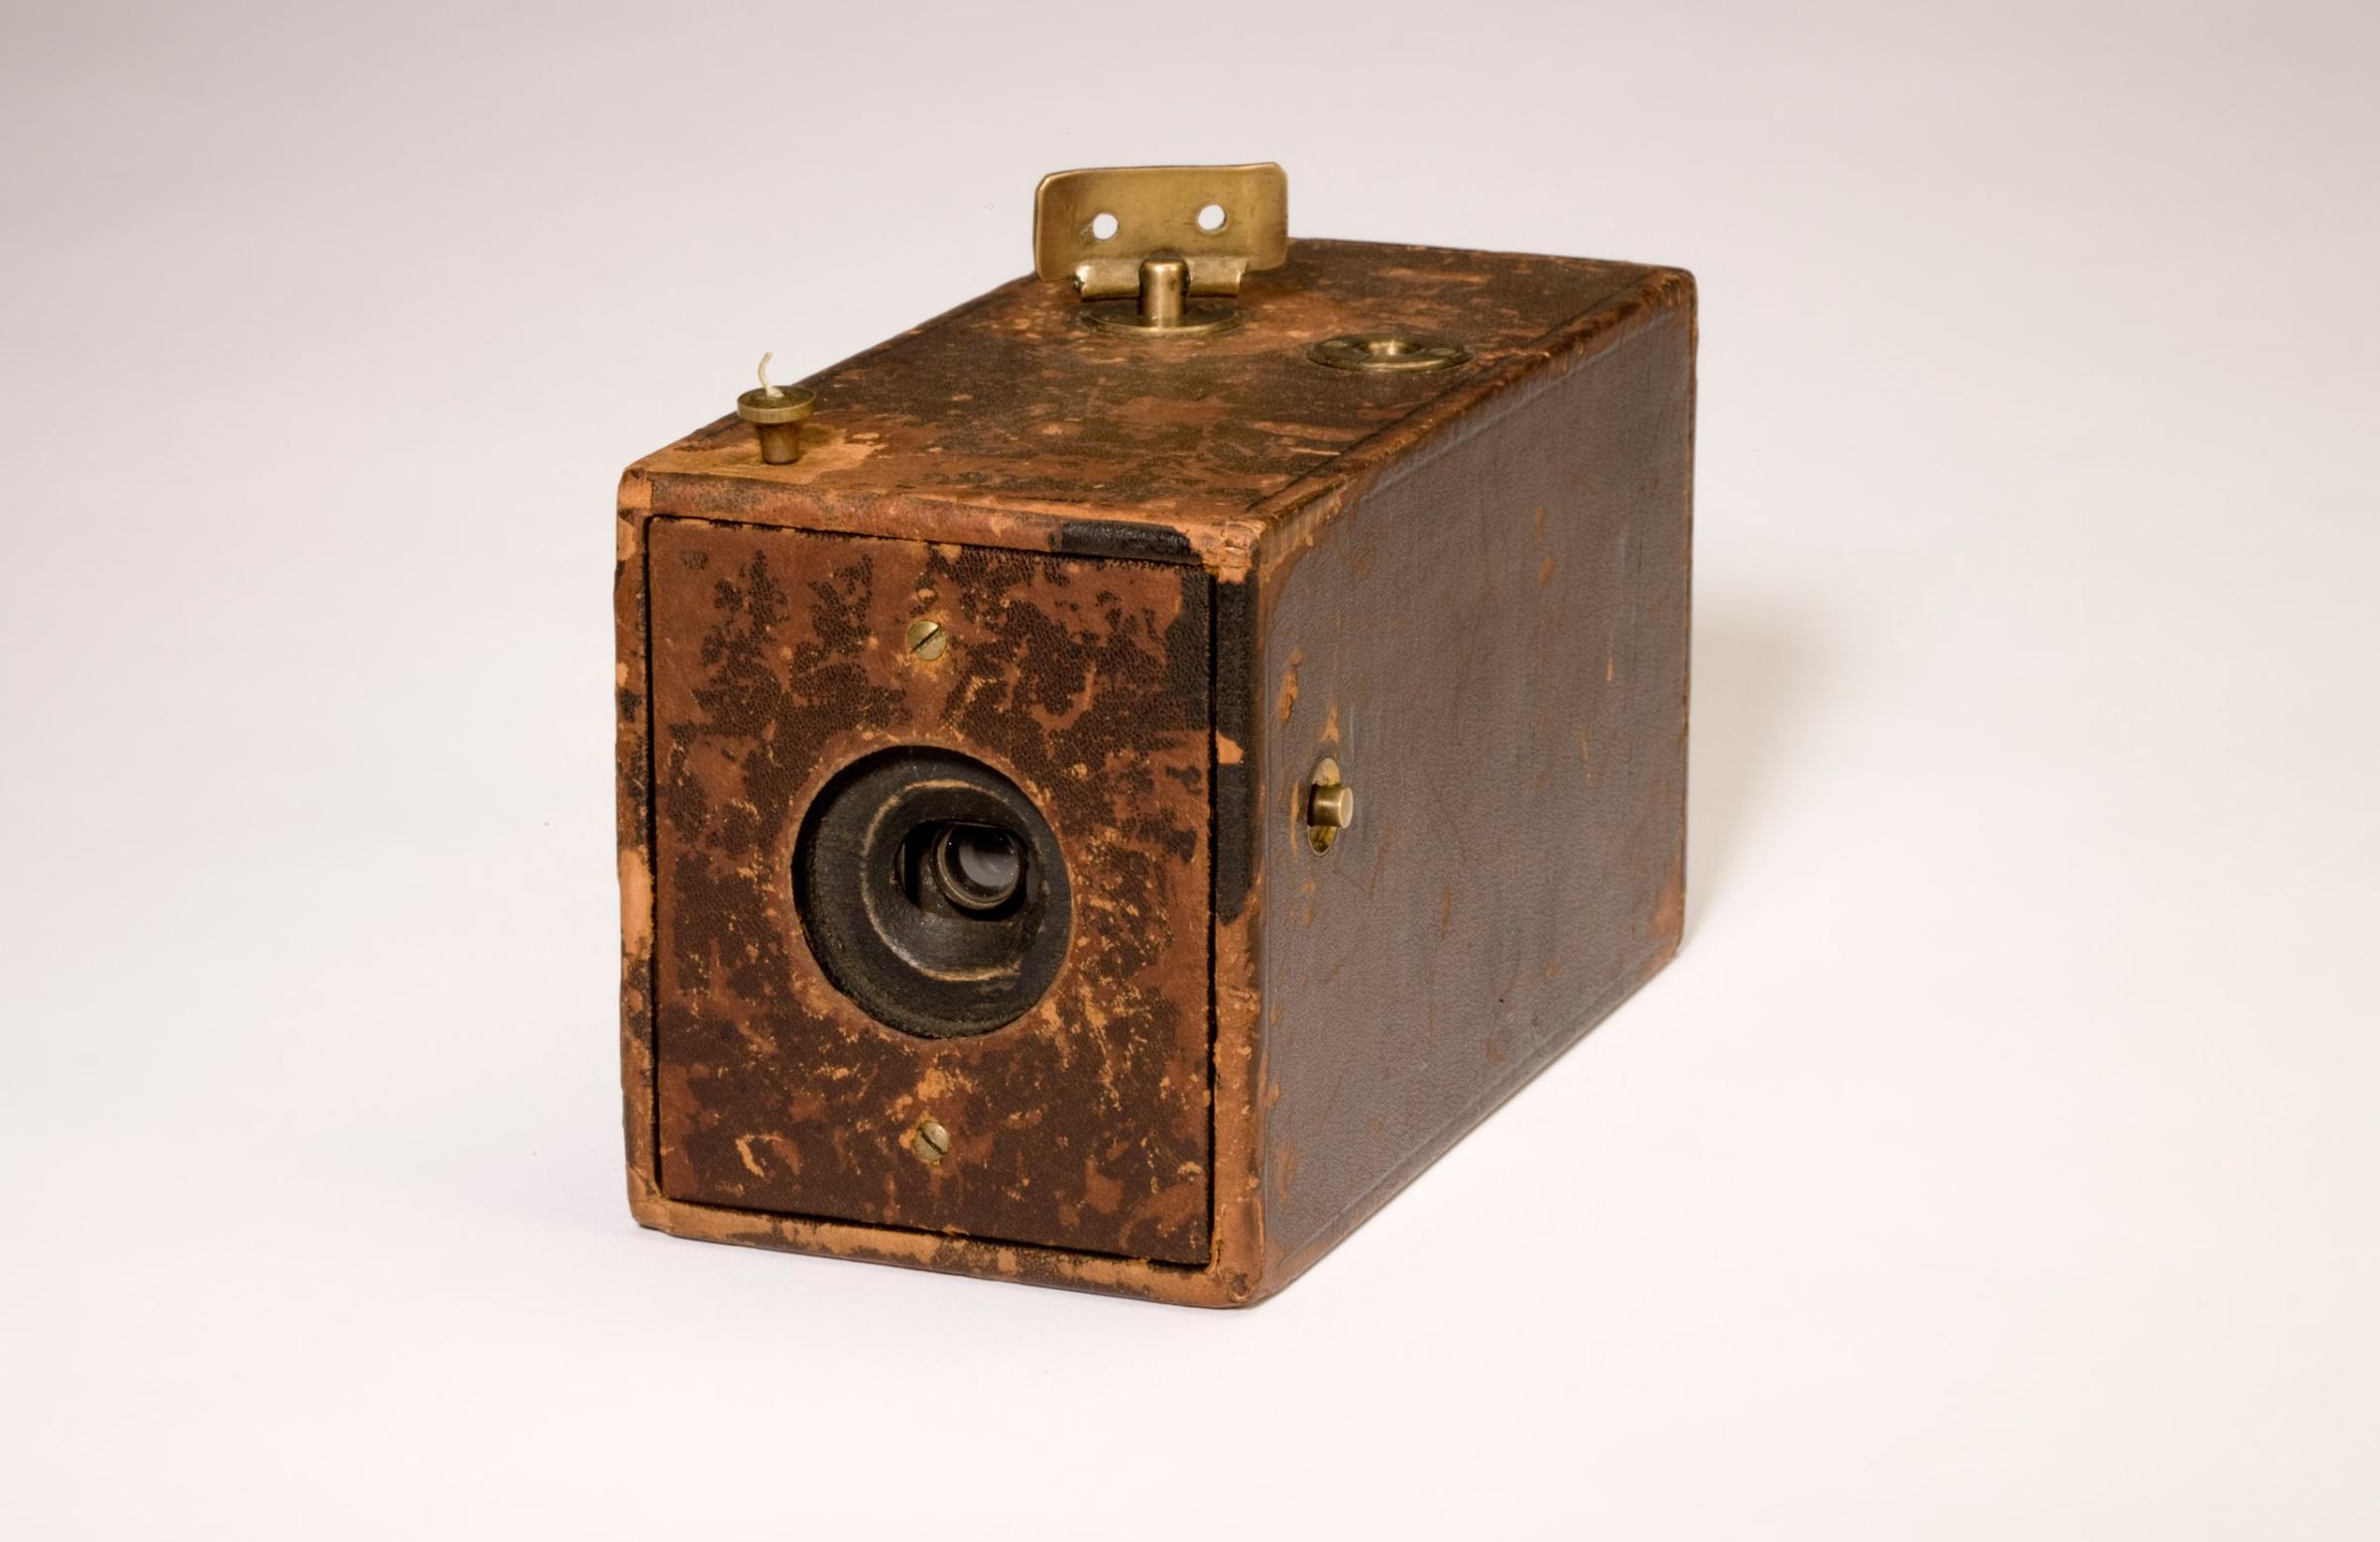 George Eastman ordered six sample cameras from Brownell Manufacturing in November 1887 for testing purposes. This is the only known survivor of those six, making it the oldest known Kodak camera